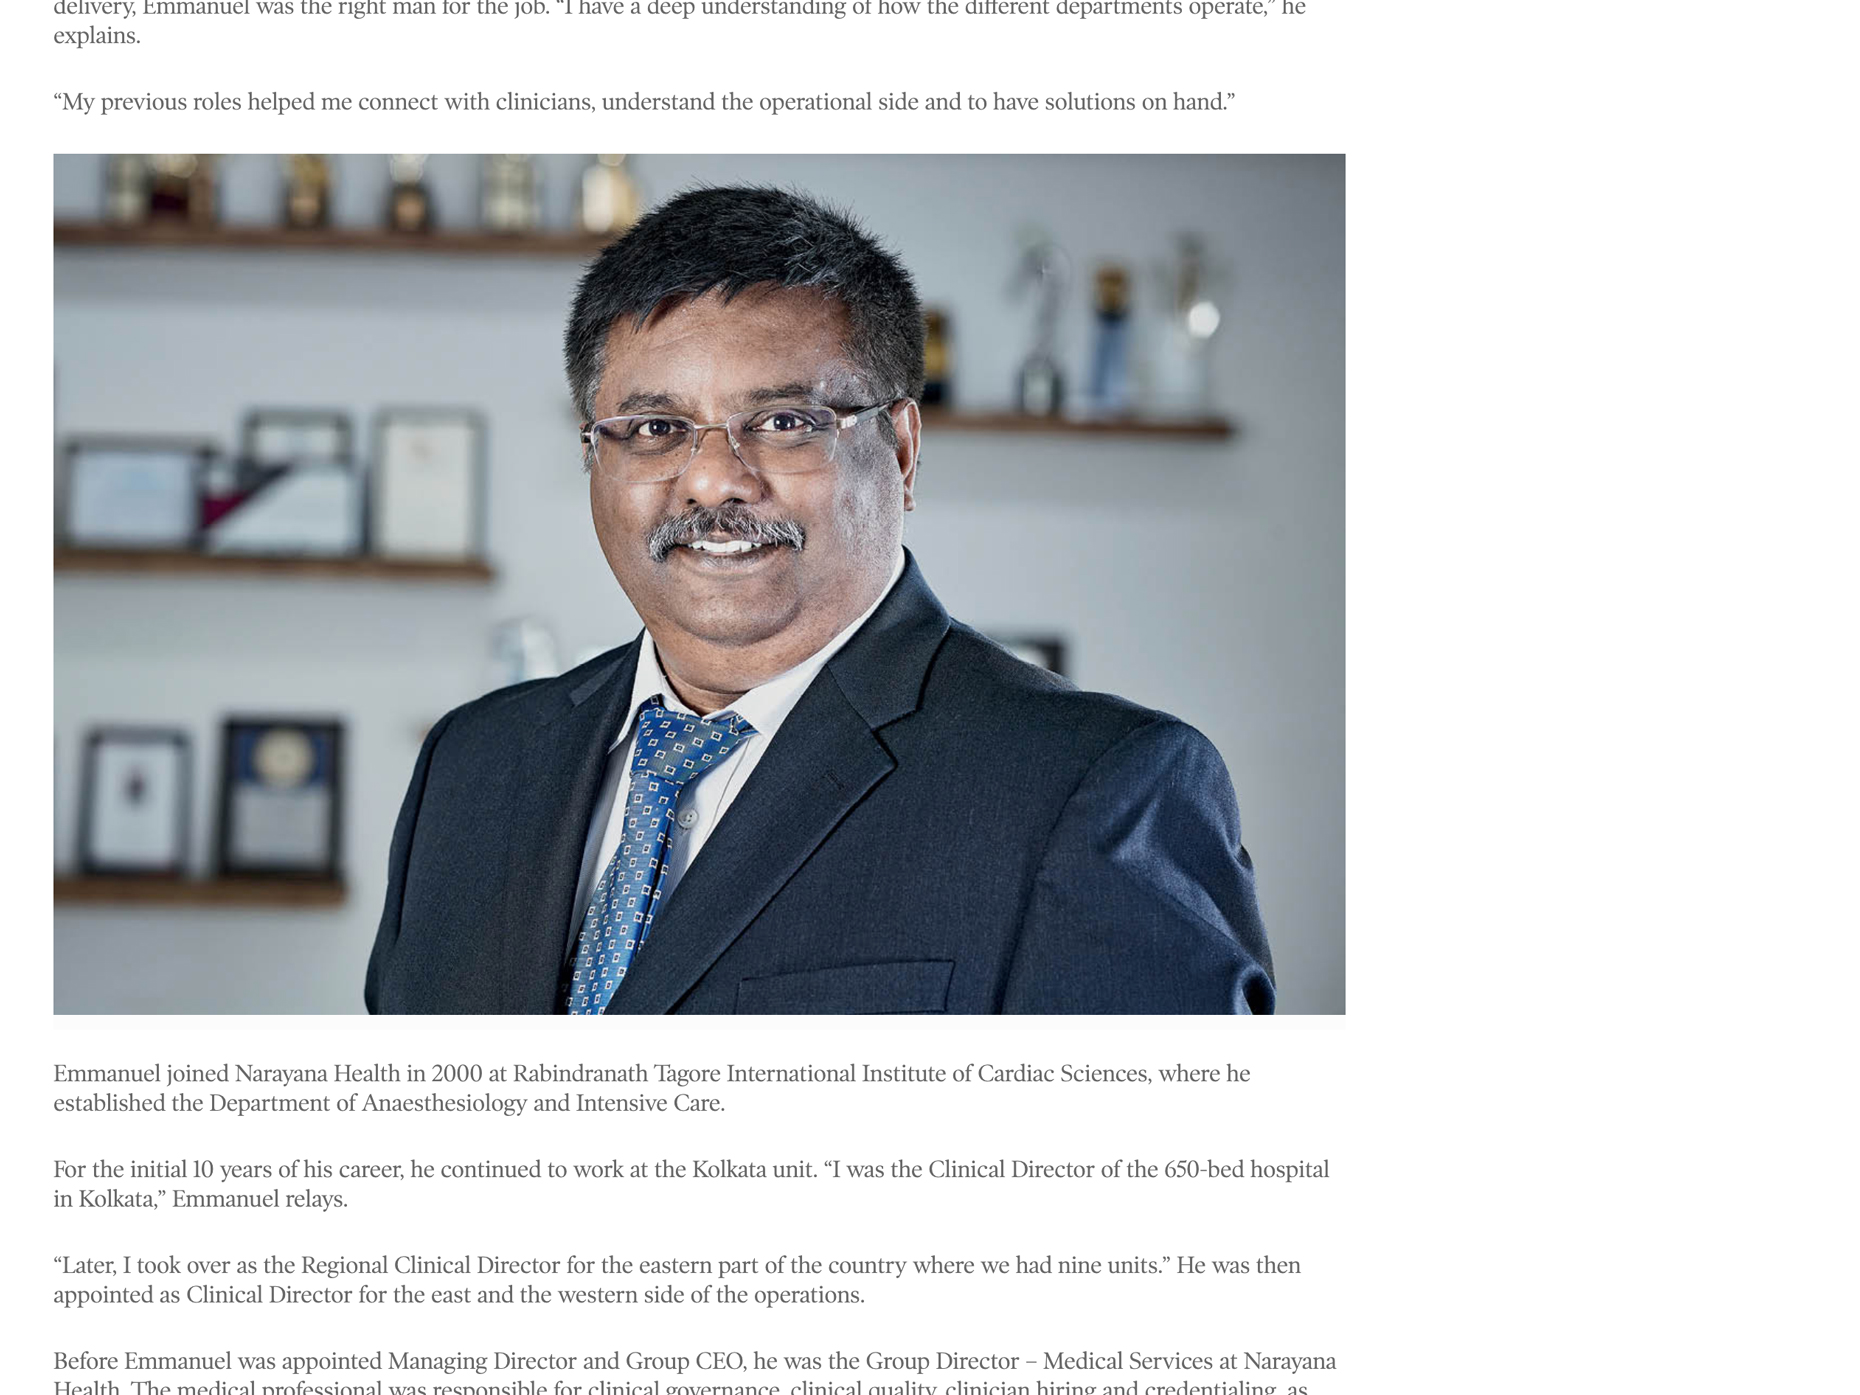 Corporate Portrait & Business headshot of Emmanuel Rupert Managing Director and Group CEO, Narayana Health, for International Magazine & Media Cover Story